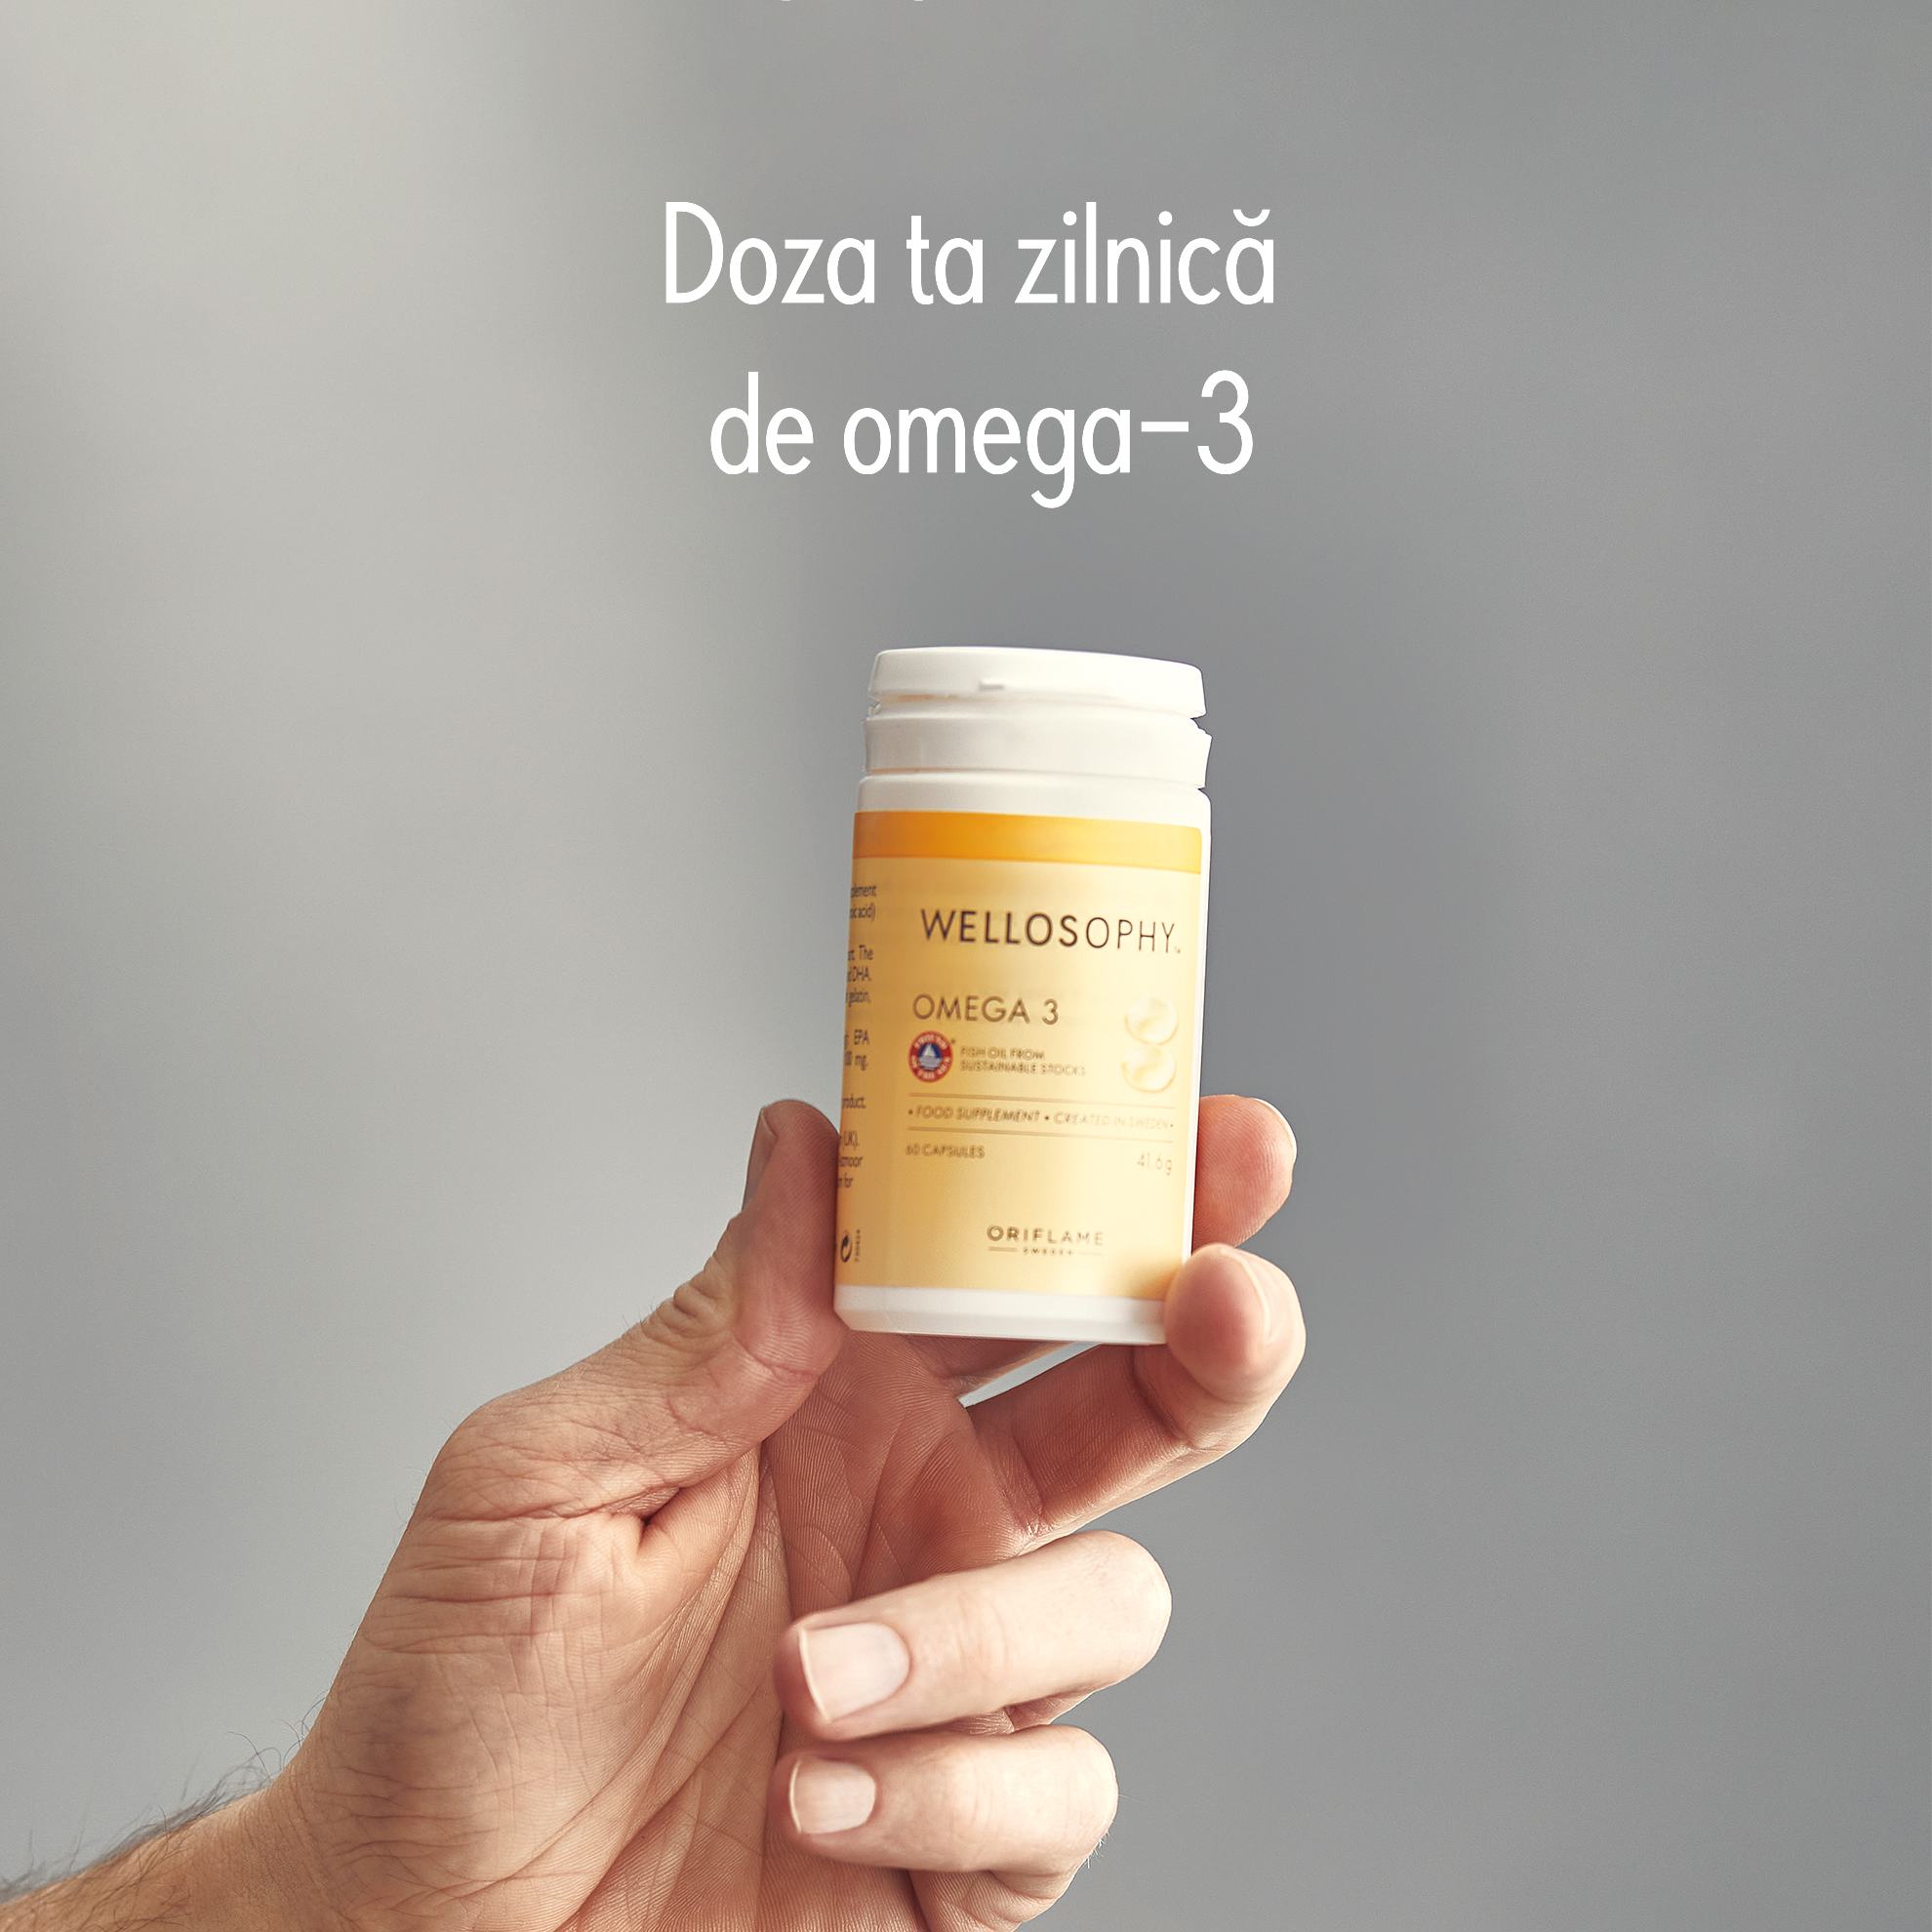 https://media-cdn.oriflame.com/productImage?externalMediaId=product-management-media%2fProducts%2f38556%2fRO%2f38556_4.png&id=18356181&version=1